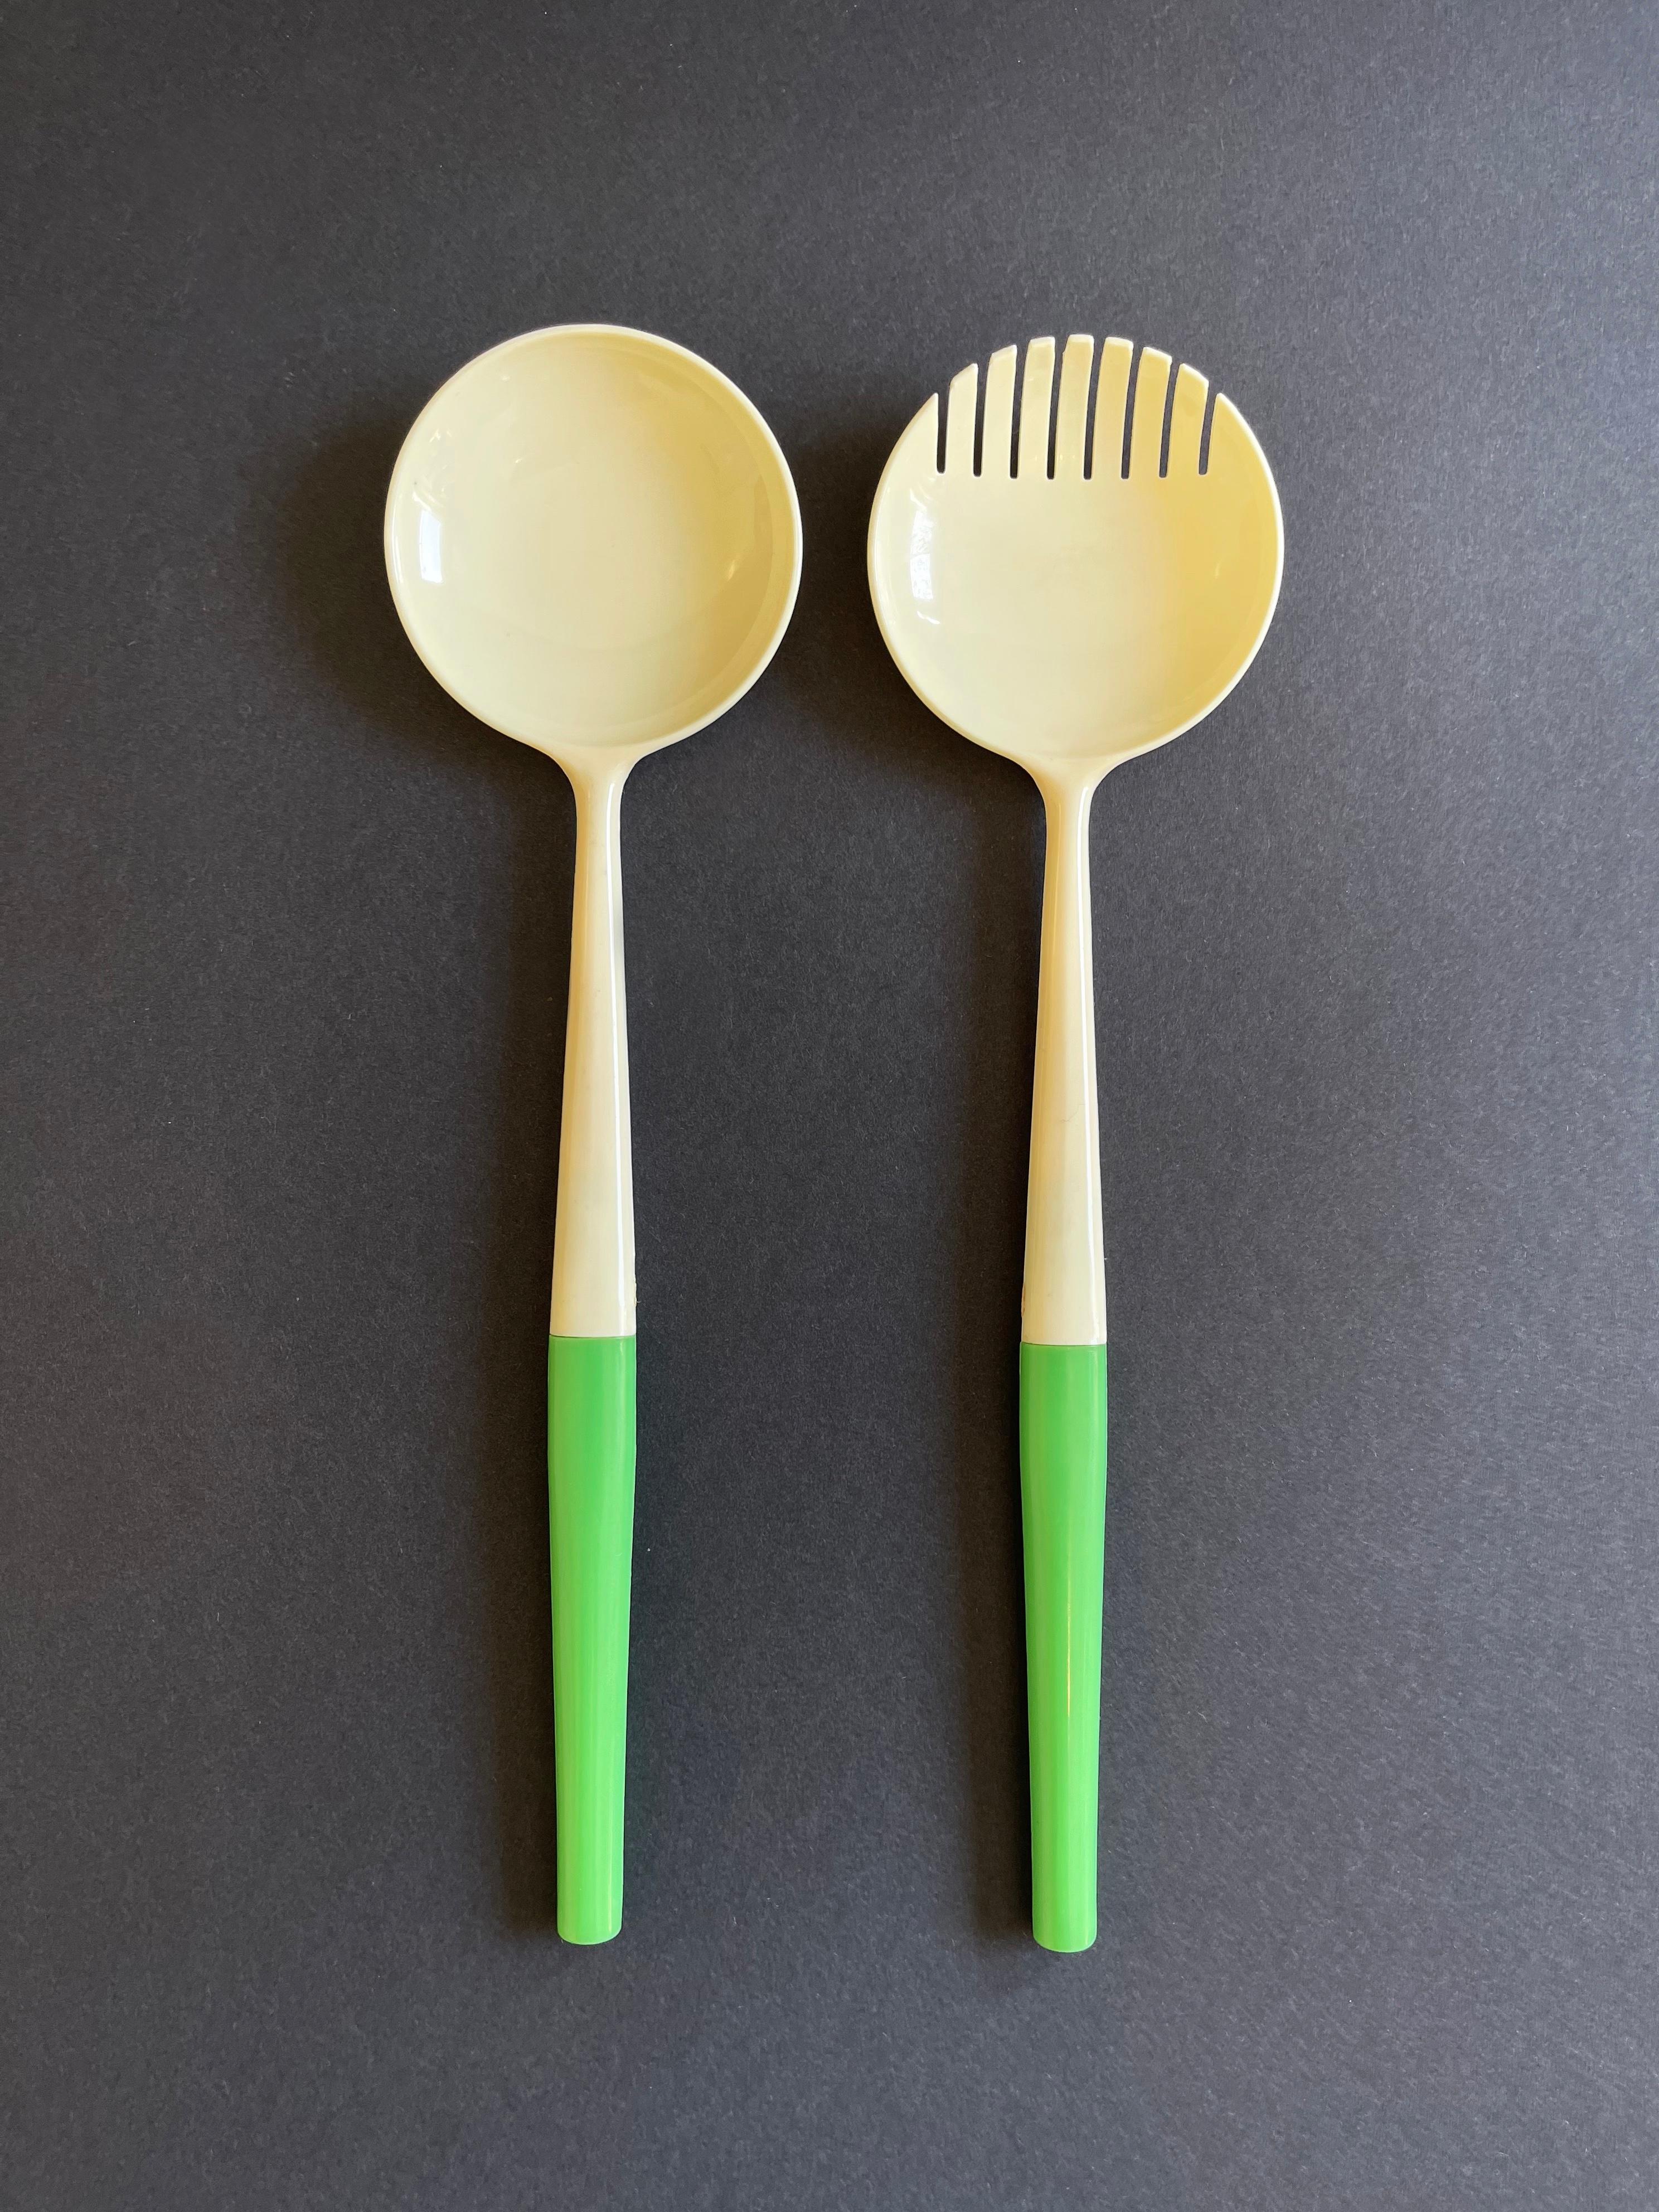 Absolute rare collectors item by Kartell Samco, Italy: this very set of salad cutlery comes in a cream with pistachio green handles!
Designed in 1958 amongst other household items by Gino Colombini, this set is also attributed to him.
Model number